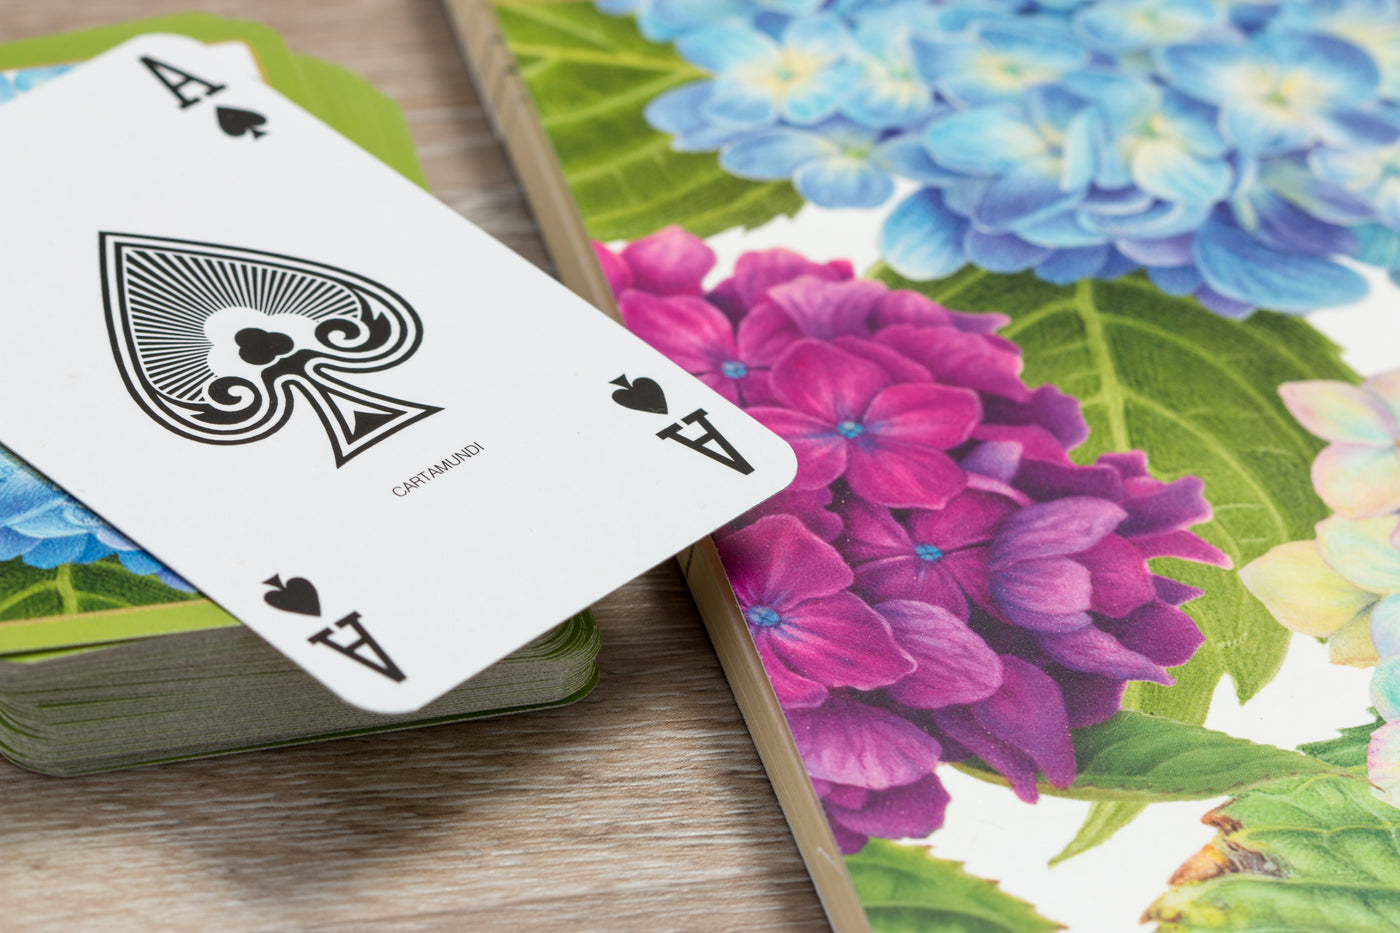 Ace of Spades Bridge Playing Card take from a set of bridge cards